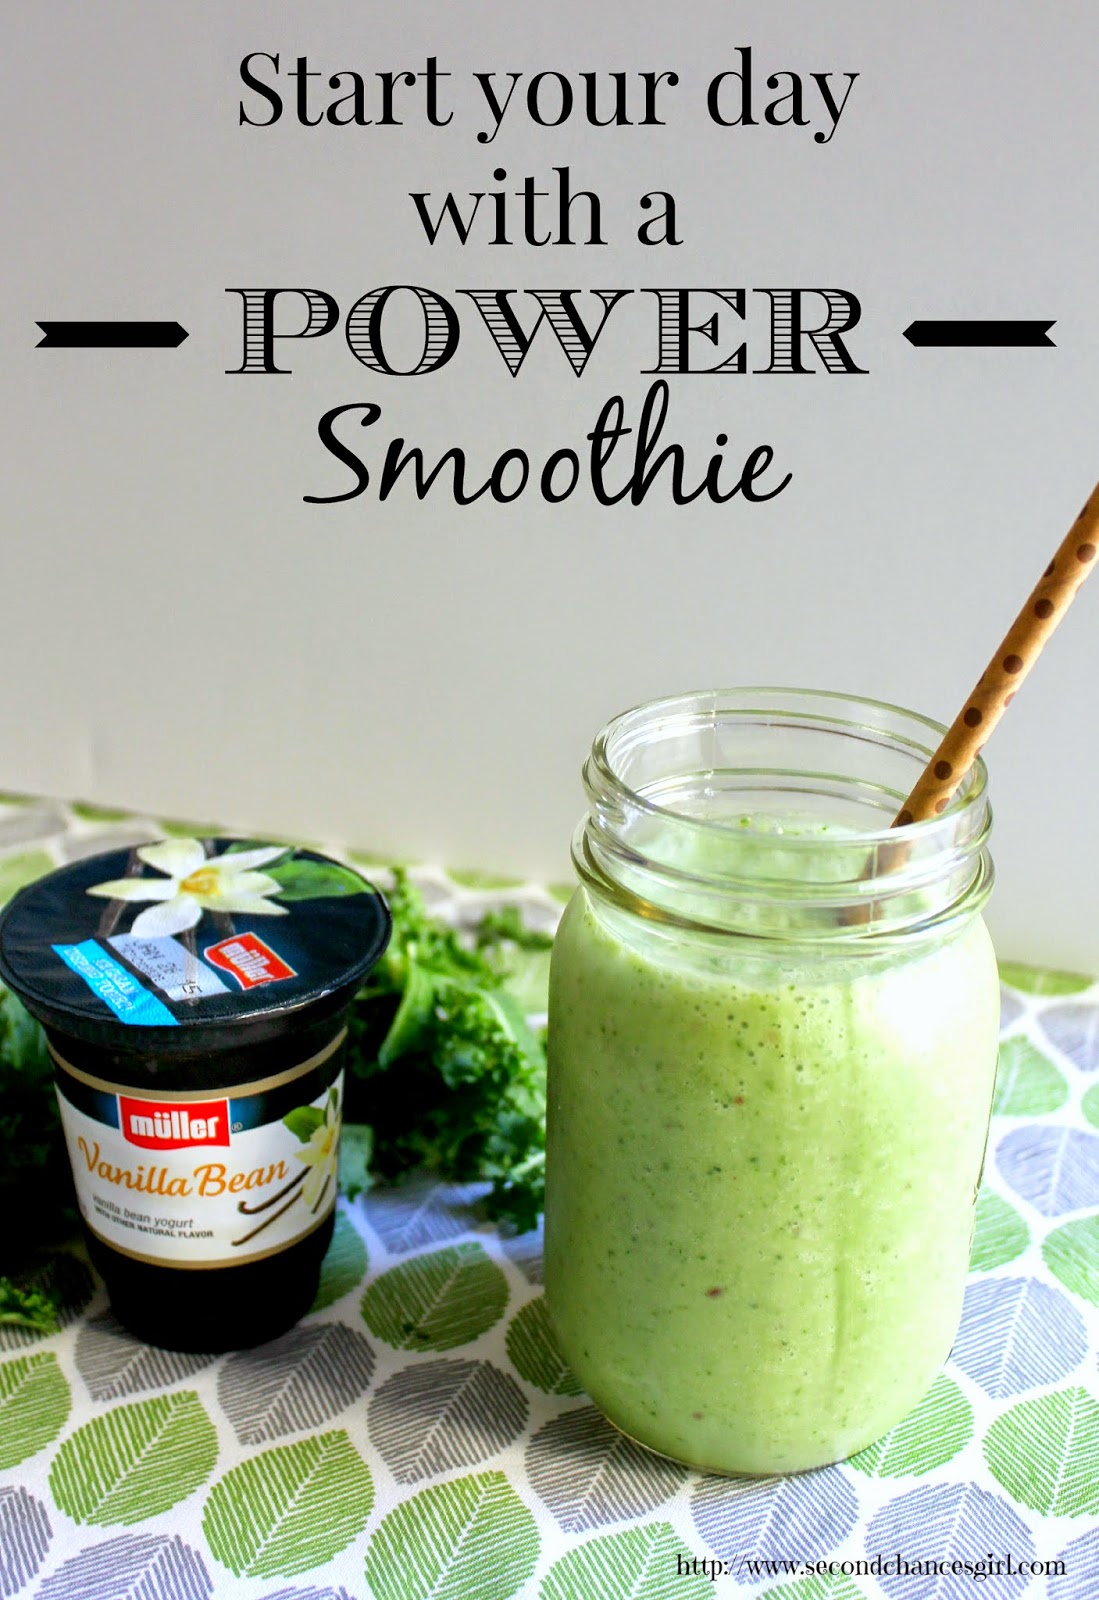 Start your day with a power smoothie! #MullerMoment #ad